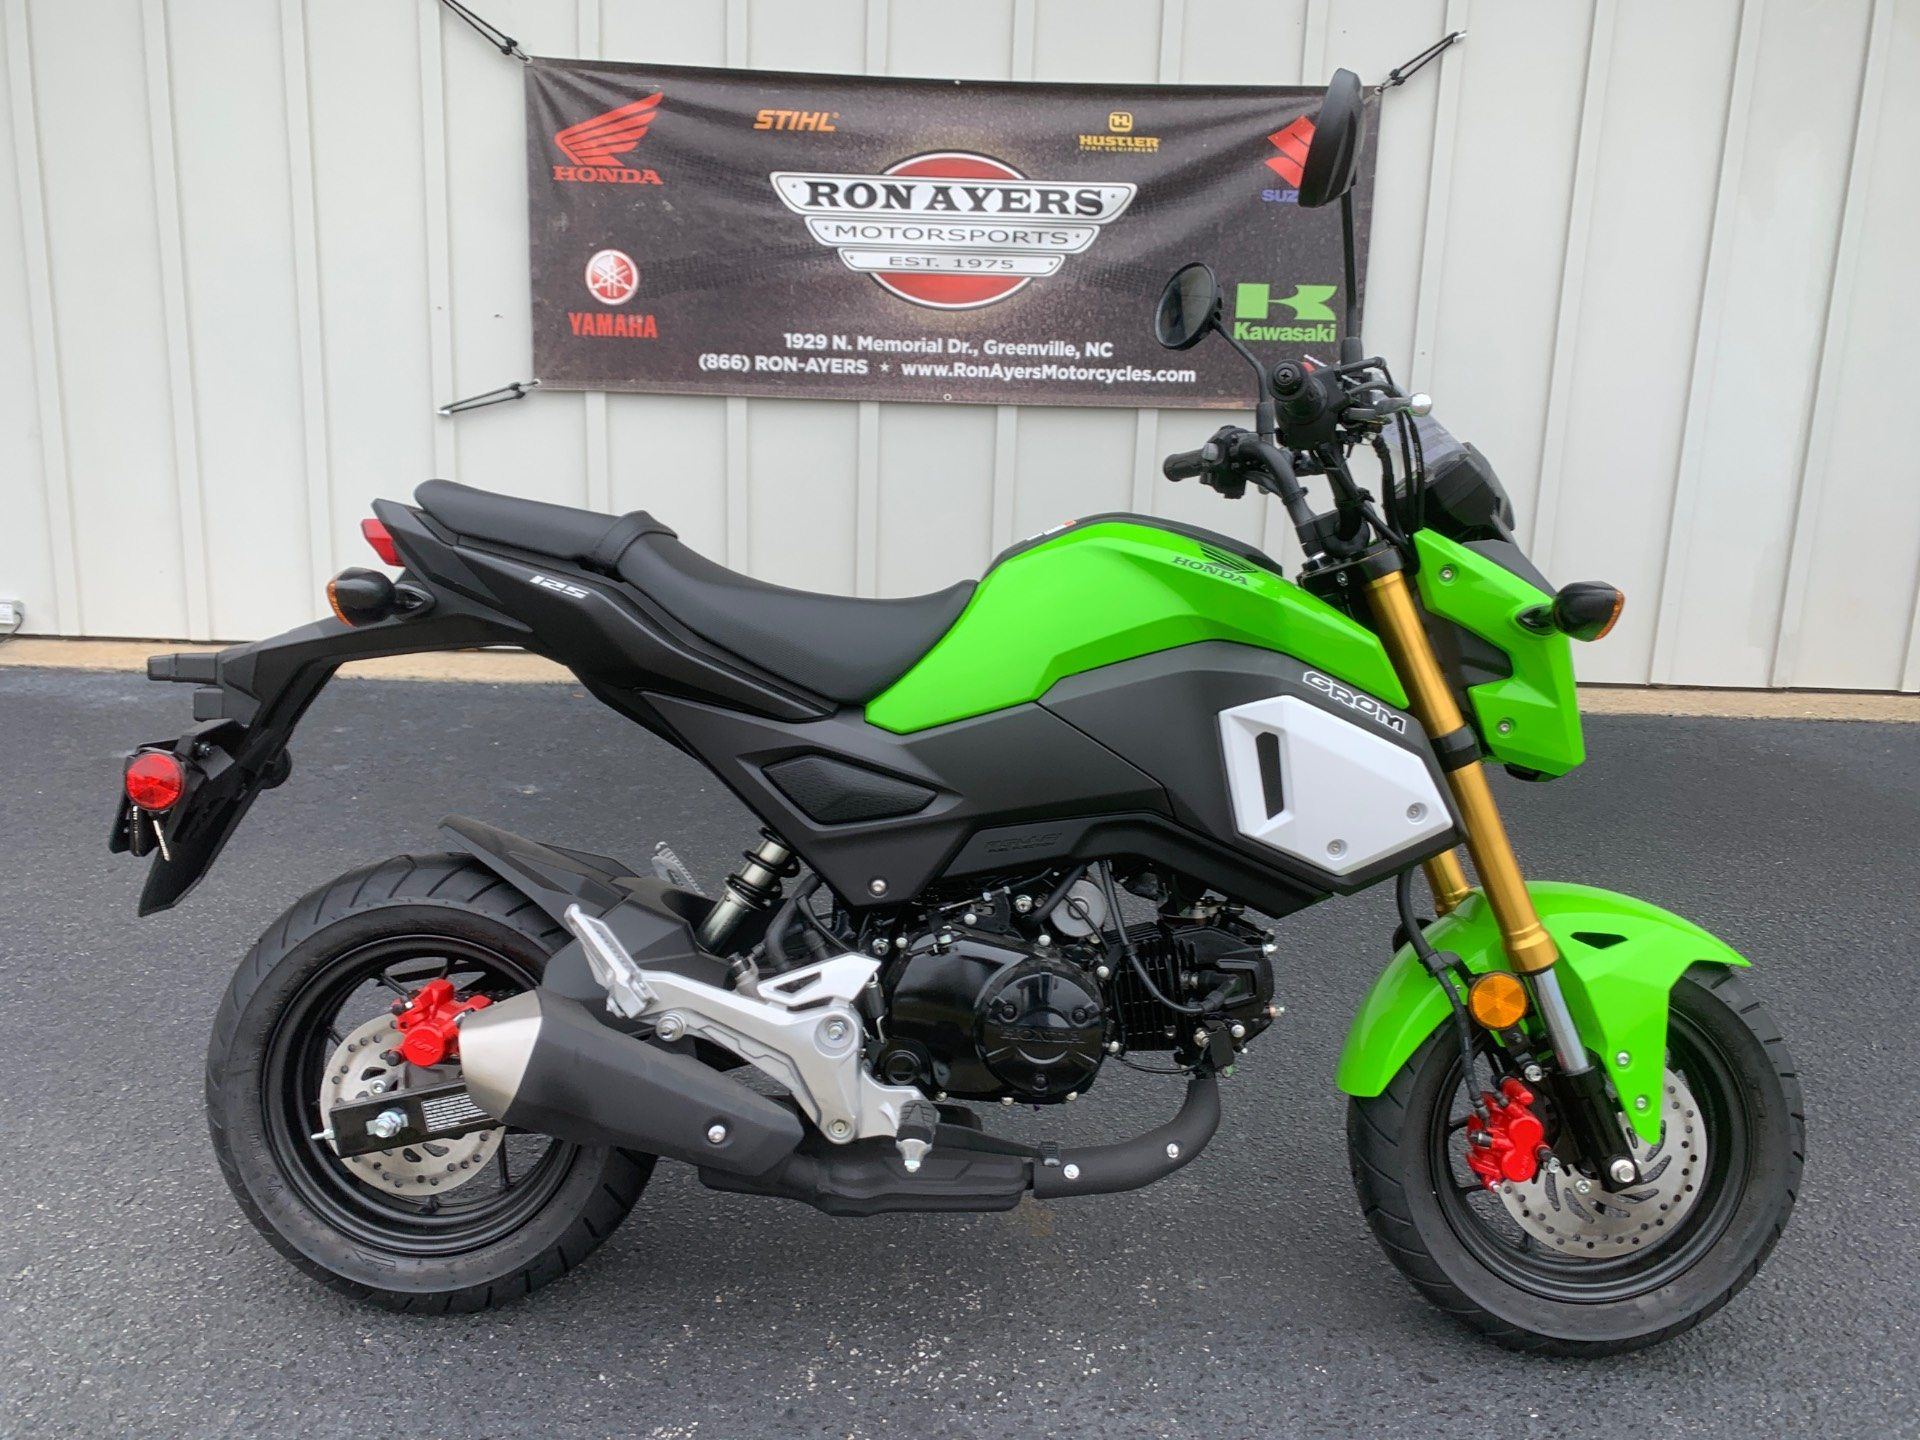 New 2020 Honda Grom Motorcycles in Greenville, NC Stock Number N/A